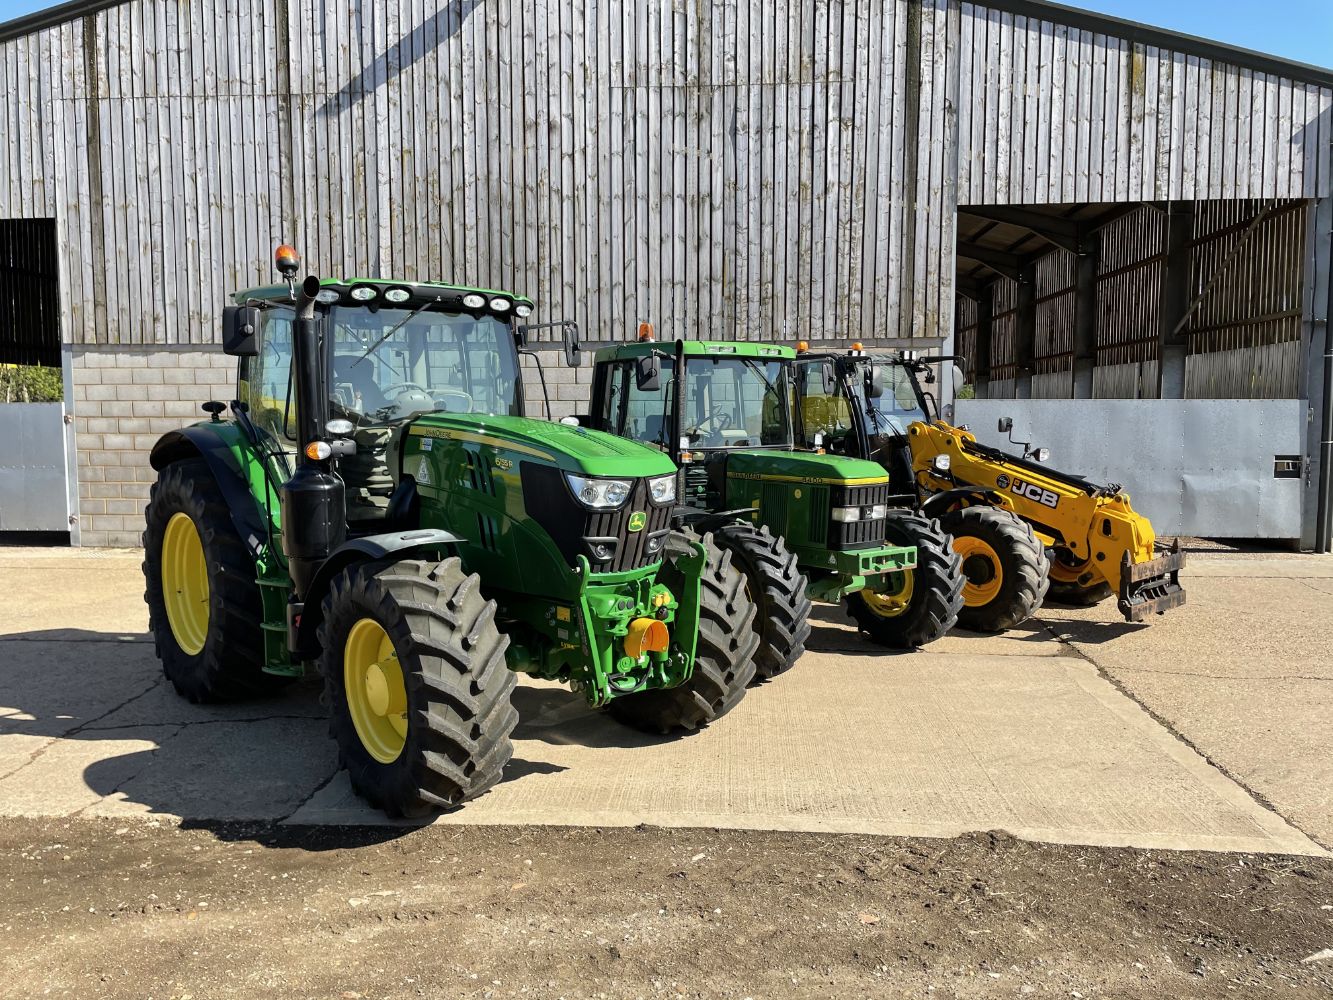 R & L Allibone - Online Timed Auction of Arable and Livestock Machinery and Equipment